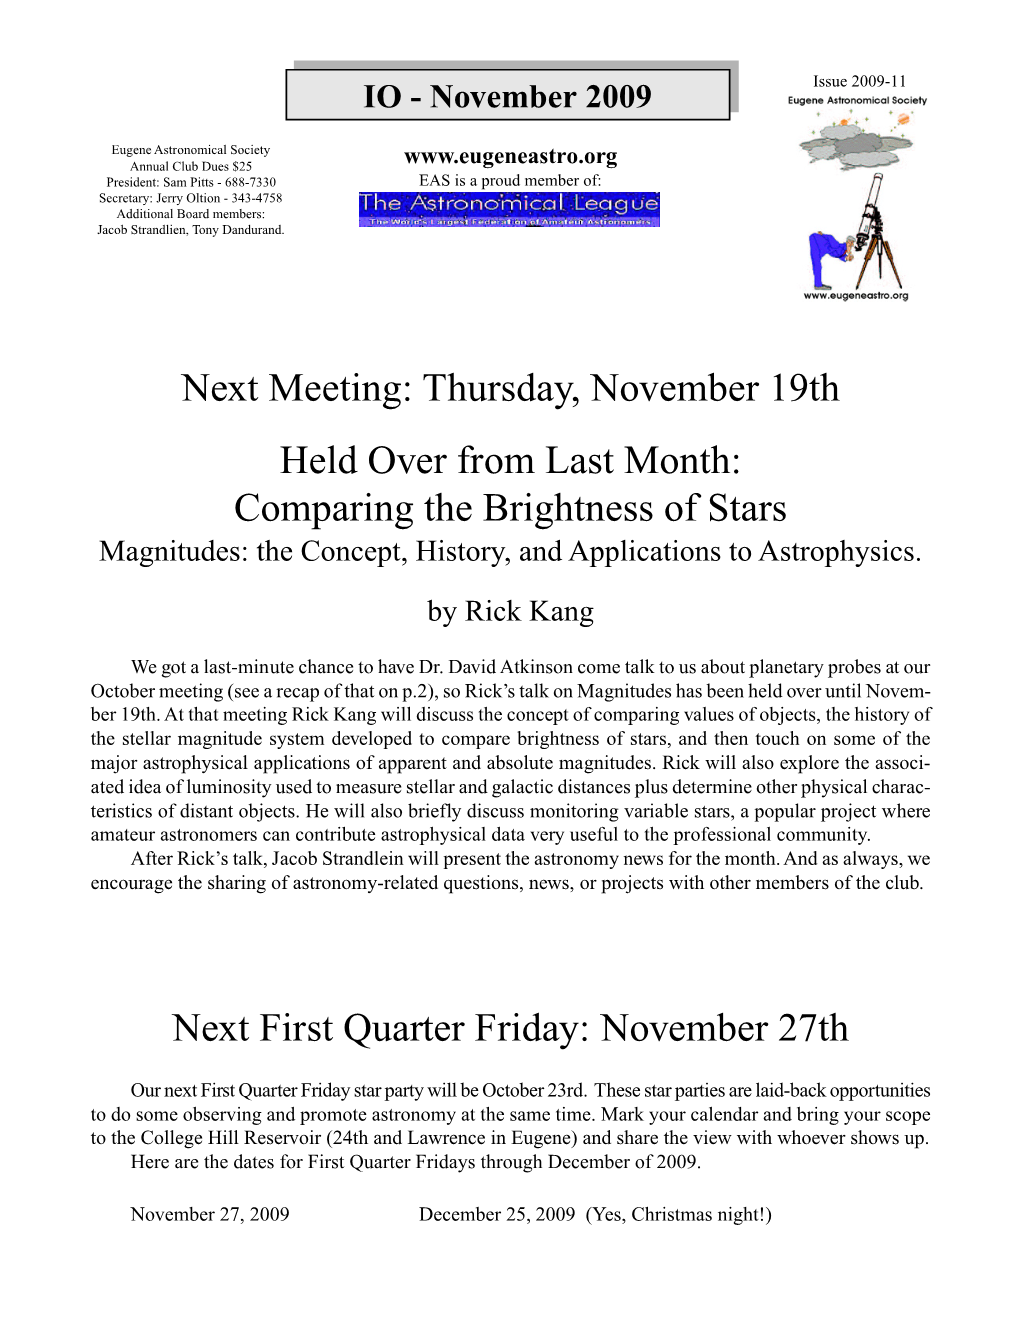 Next Meeting: Thursday, November 19Th Held Over from Last Month: Comparing the Brightness of Stars Magnitudes: the Concept, History, and Applications to Astrophysics